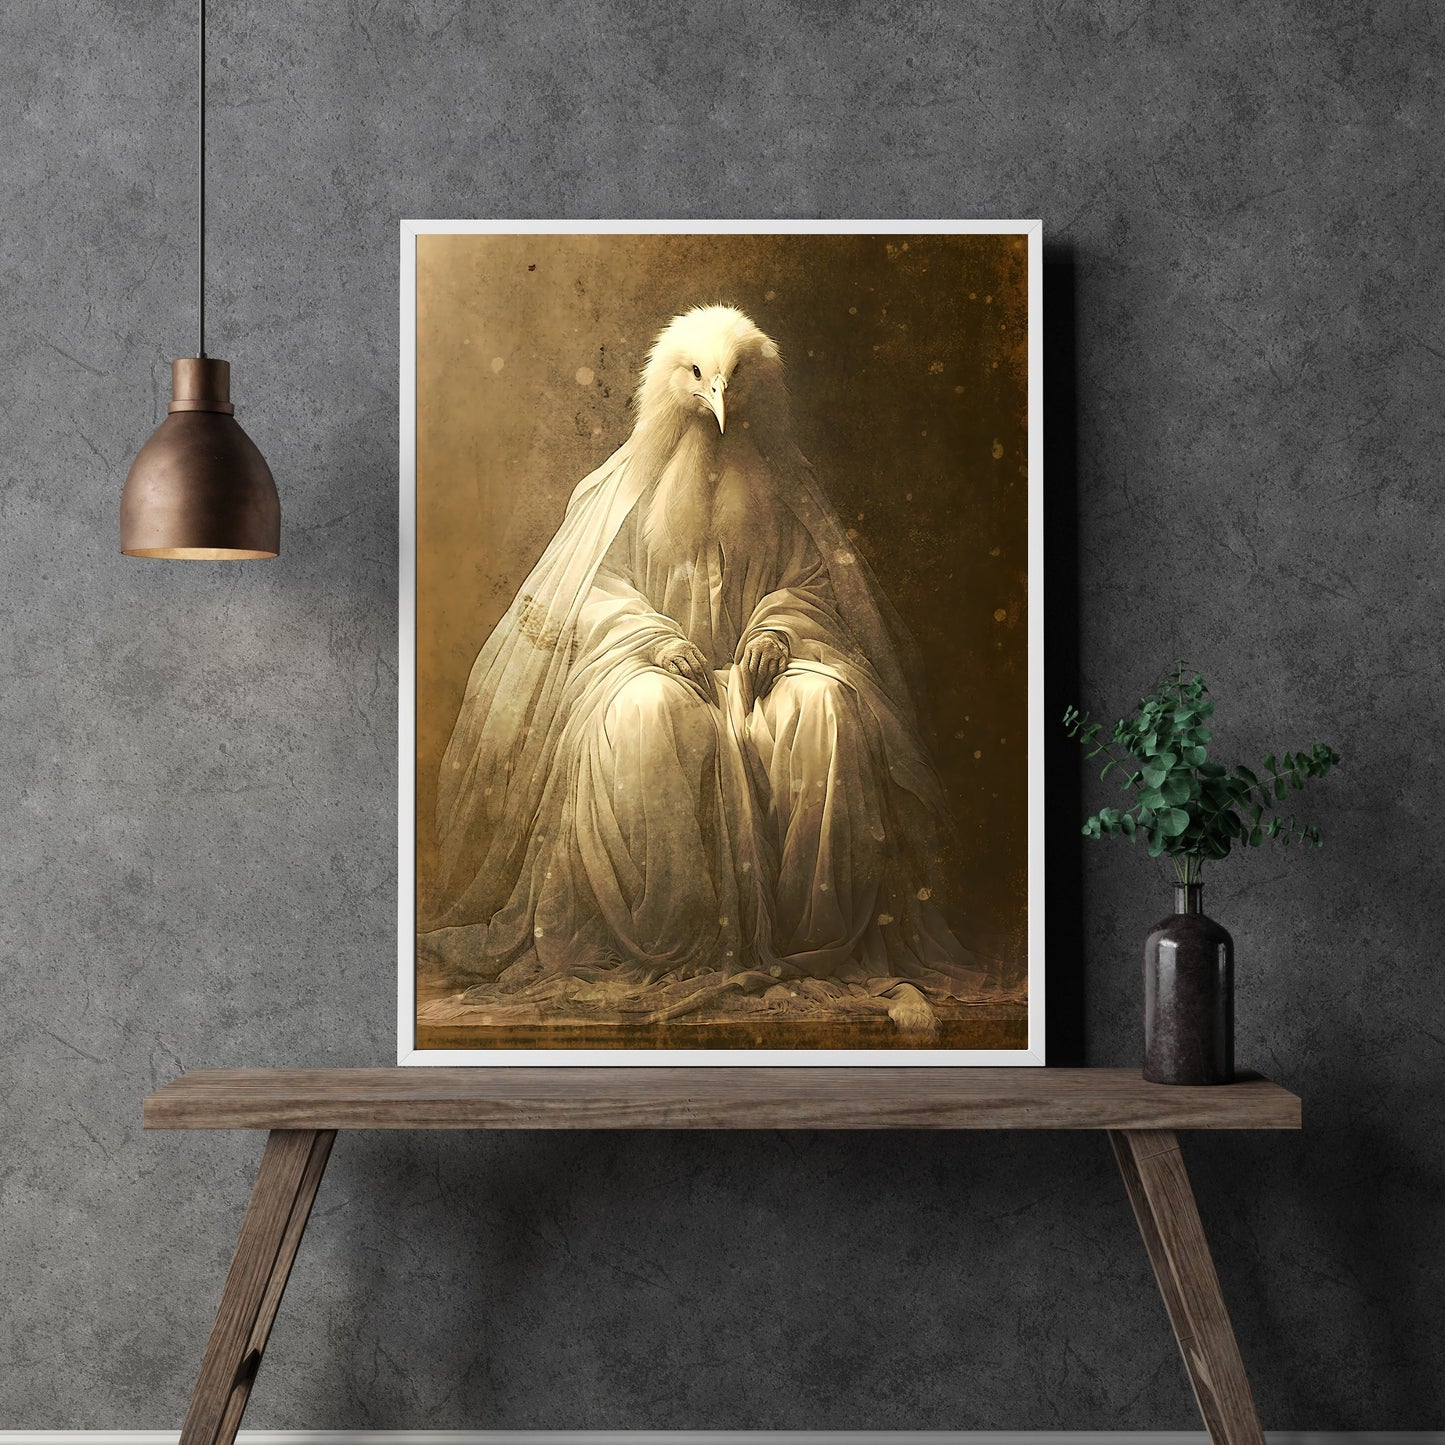 Chicken Fantasy Creature Gothic Wall Art Dark Cottagecore Vintage Photography Witchy Decor Gothic Occult Poster Dark Academia Home Print Paper Poster Print